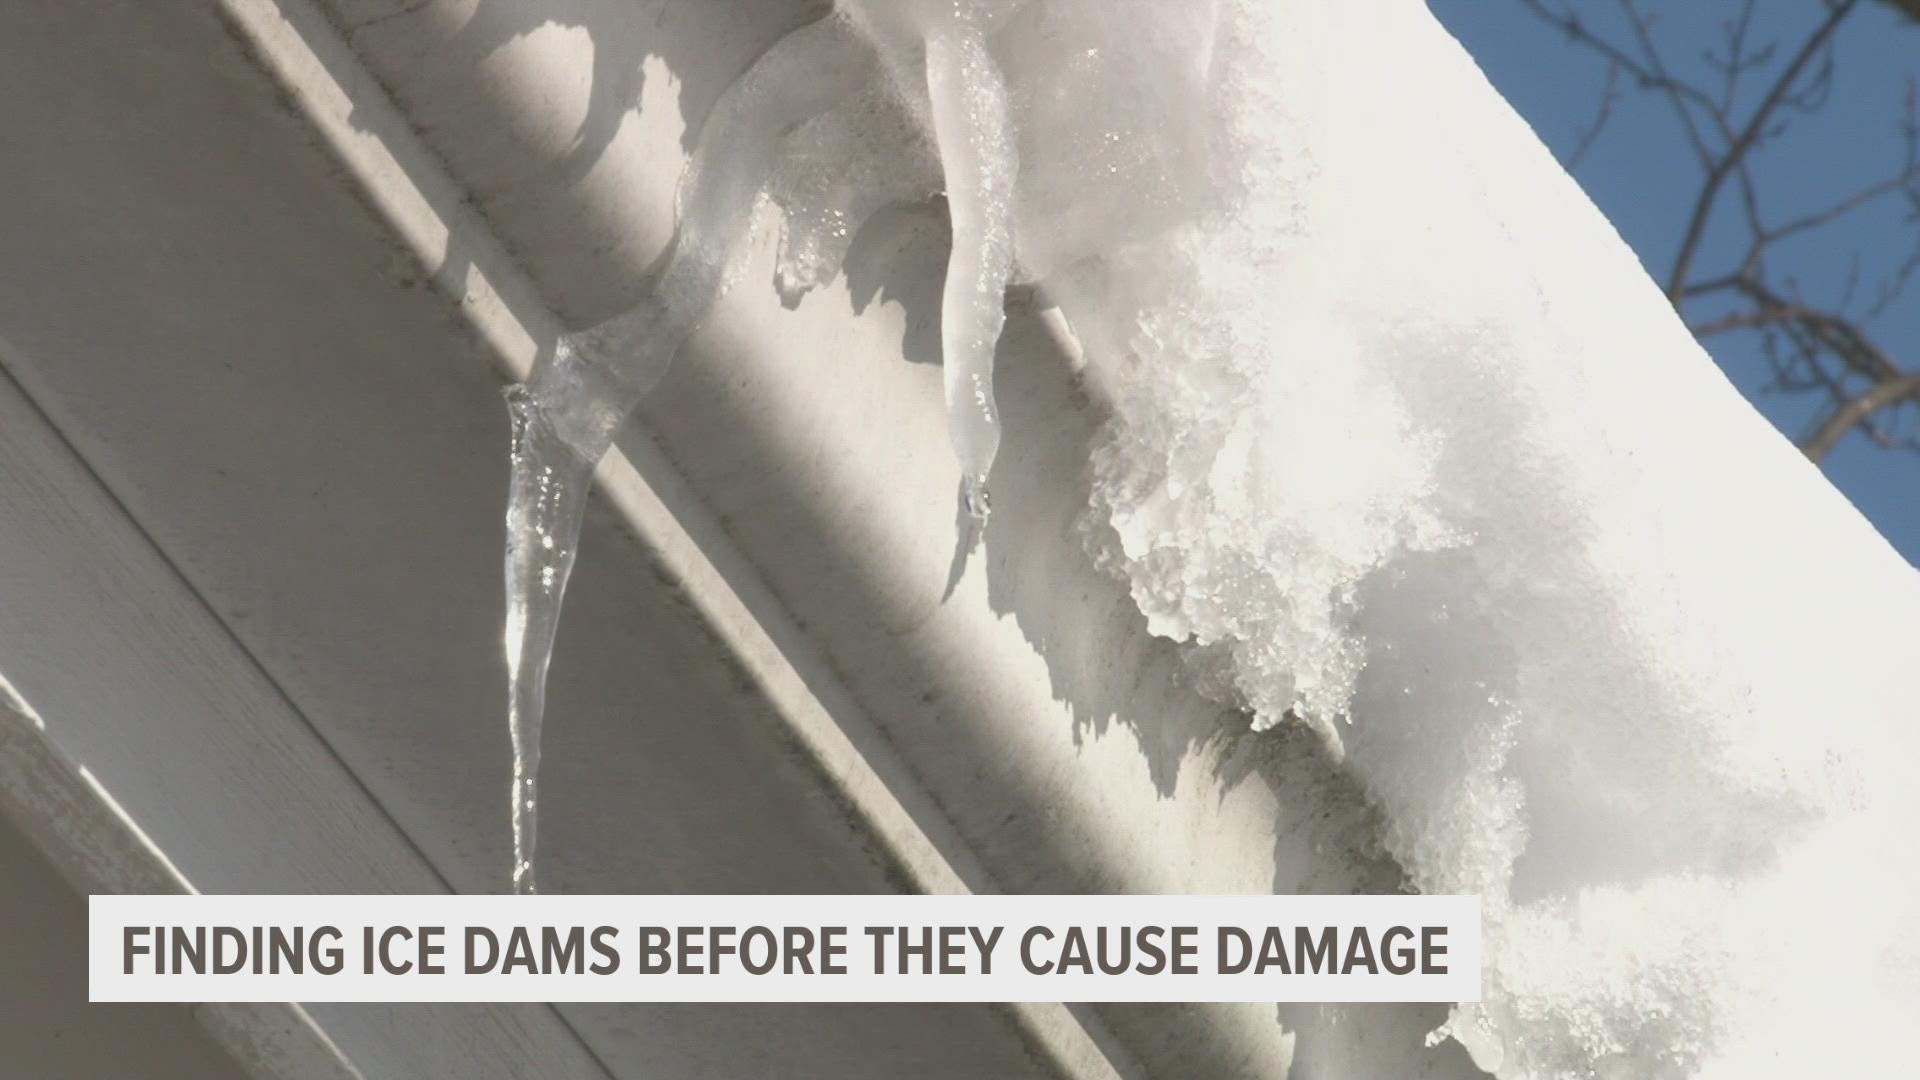 Ice dams can cause damage on par with or worse than that from wind or hail.